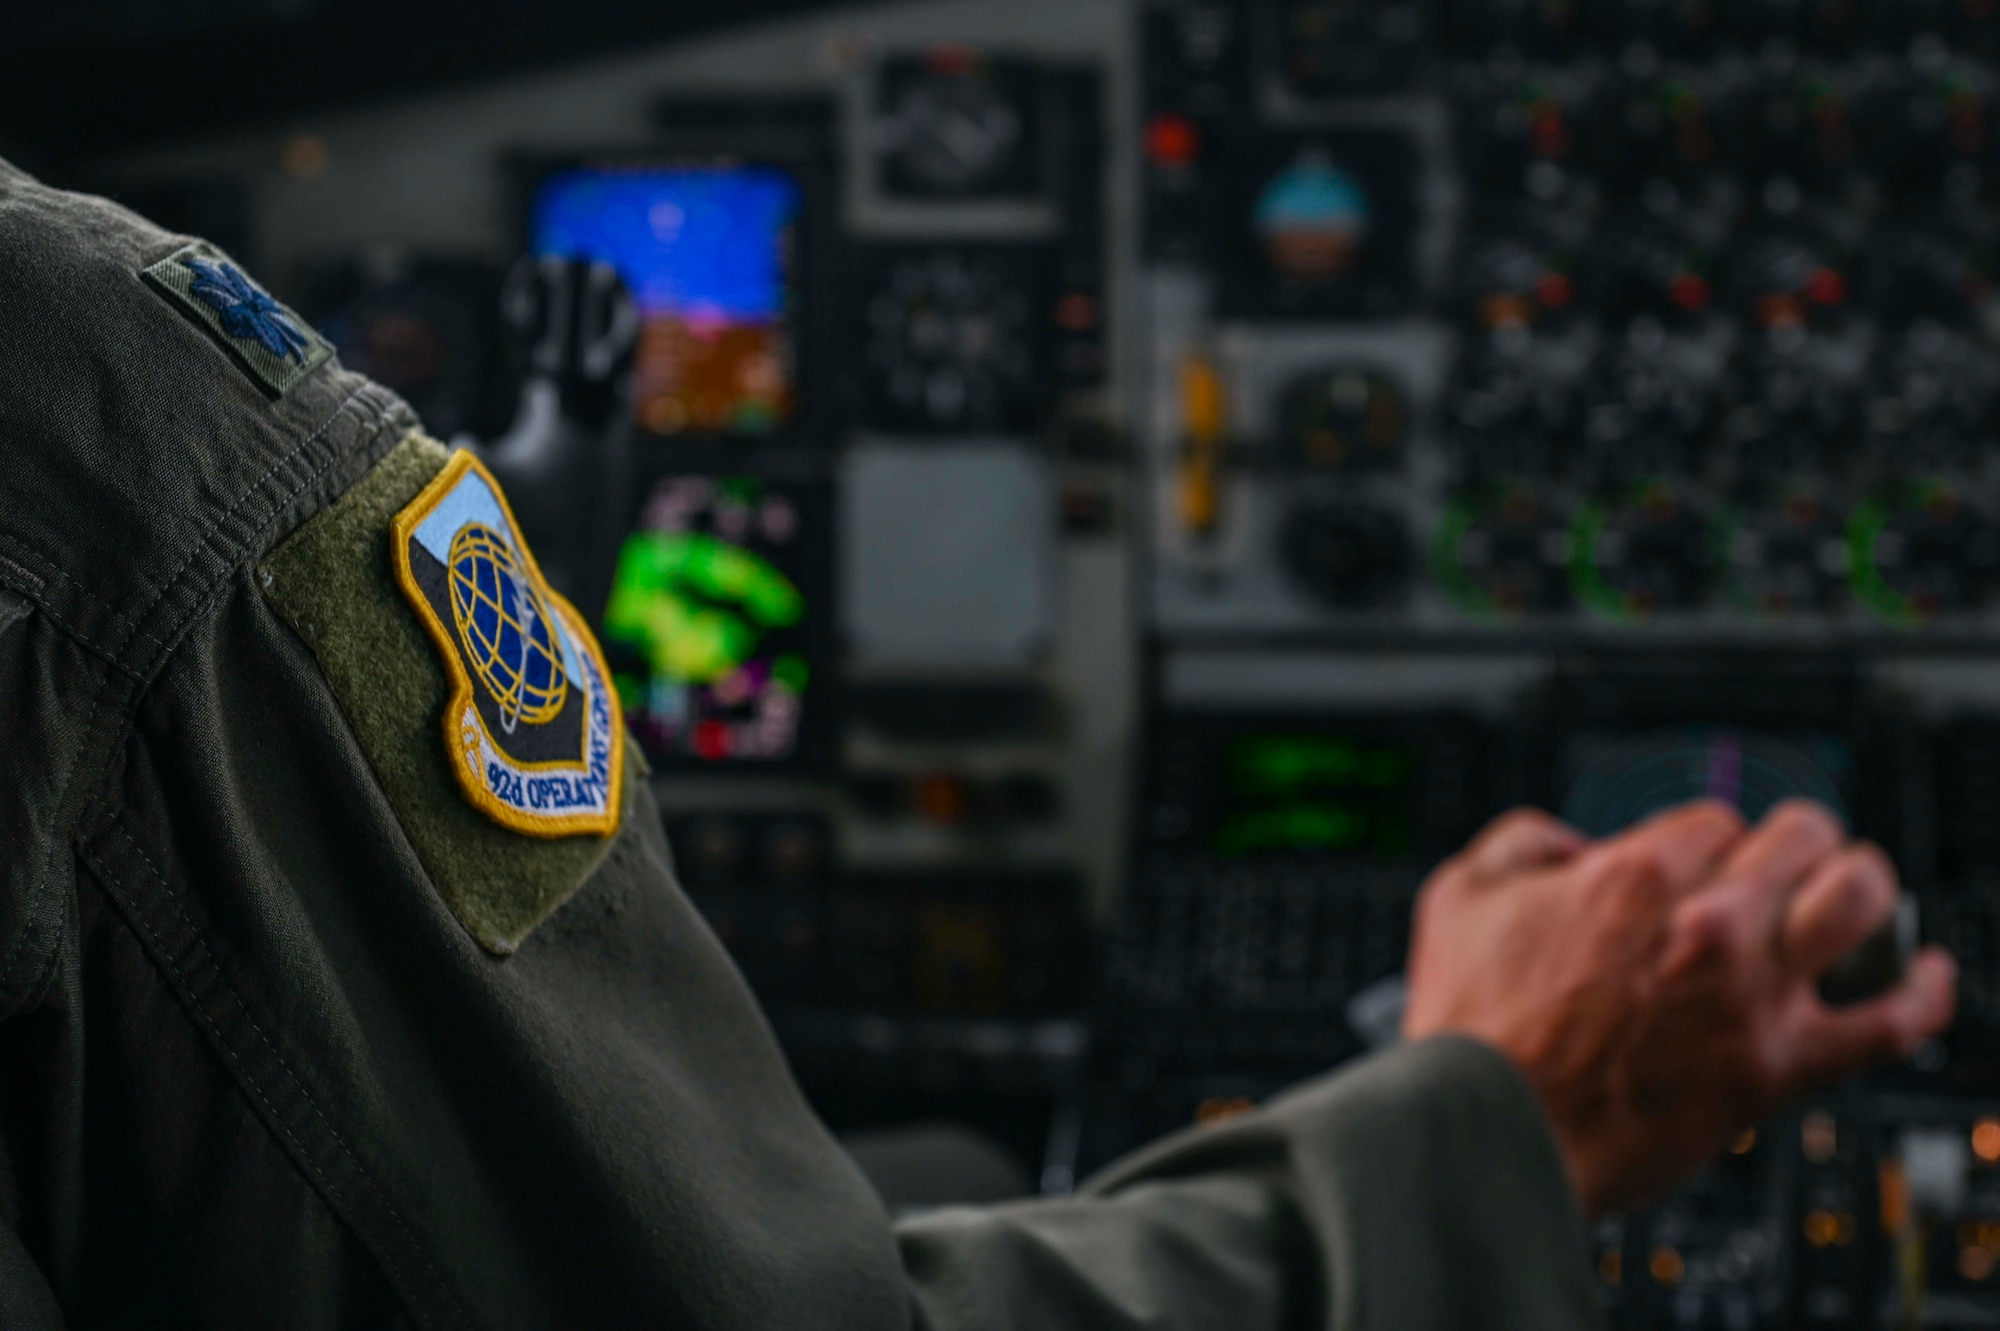 U.S. Air Force Lt. Col. Daniel Schone, a 92nd Air Refueling Squadron pilot, flies a KC-135 Stratotanker as part of Operation Centennial Contact out of Fairchild Air Force Base, Washington, June 27, 2023. The movement, which included stops at Yellowstone National Park, Mount Rushmore, and Glacier National Park, was part of Air Mobility Command’s celebration of 100 years air refueling operations and demonstrated the 92nd Air Refueling Wing’s global reach capabilities. Since its inception in 1923, air refueling has become a crucial component of military and civilian aviation operations around the world by extending the range and endurance of aircraft and enabling them to complete missions that would otherwise be impossible or require multiple stops. As a result, this capability is essential for strategic and tactical operations, as well as humanitarian relief efforts in support of AMC, U.S. Transportation Command and Department of Defense priorities. (U.S. Air Force photo by Airman 1st Class Haiden Morris)